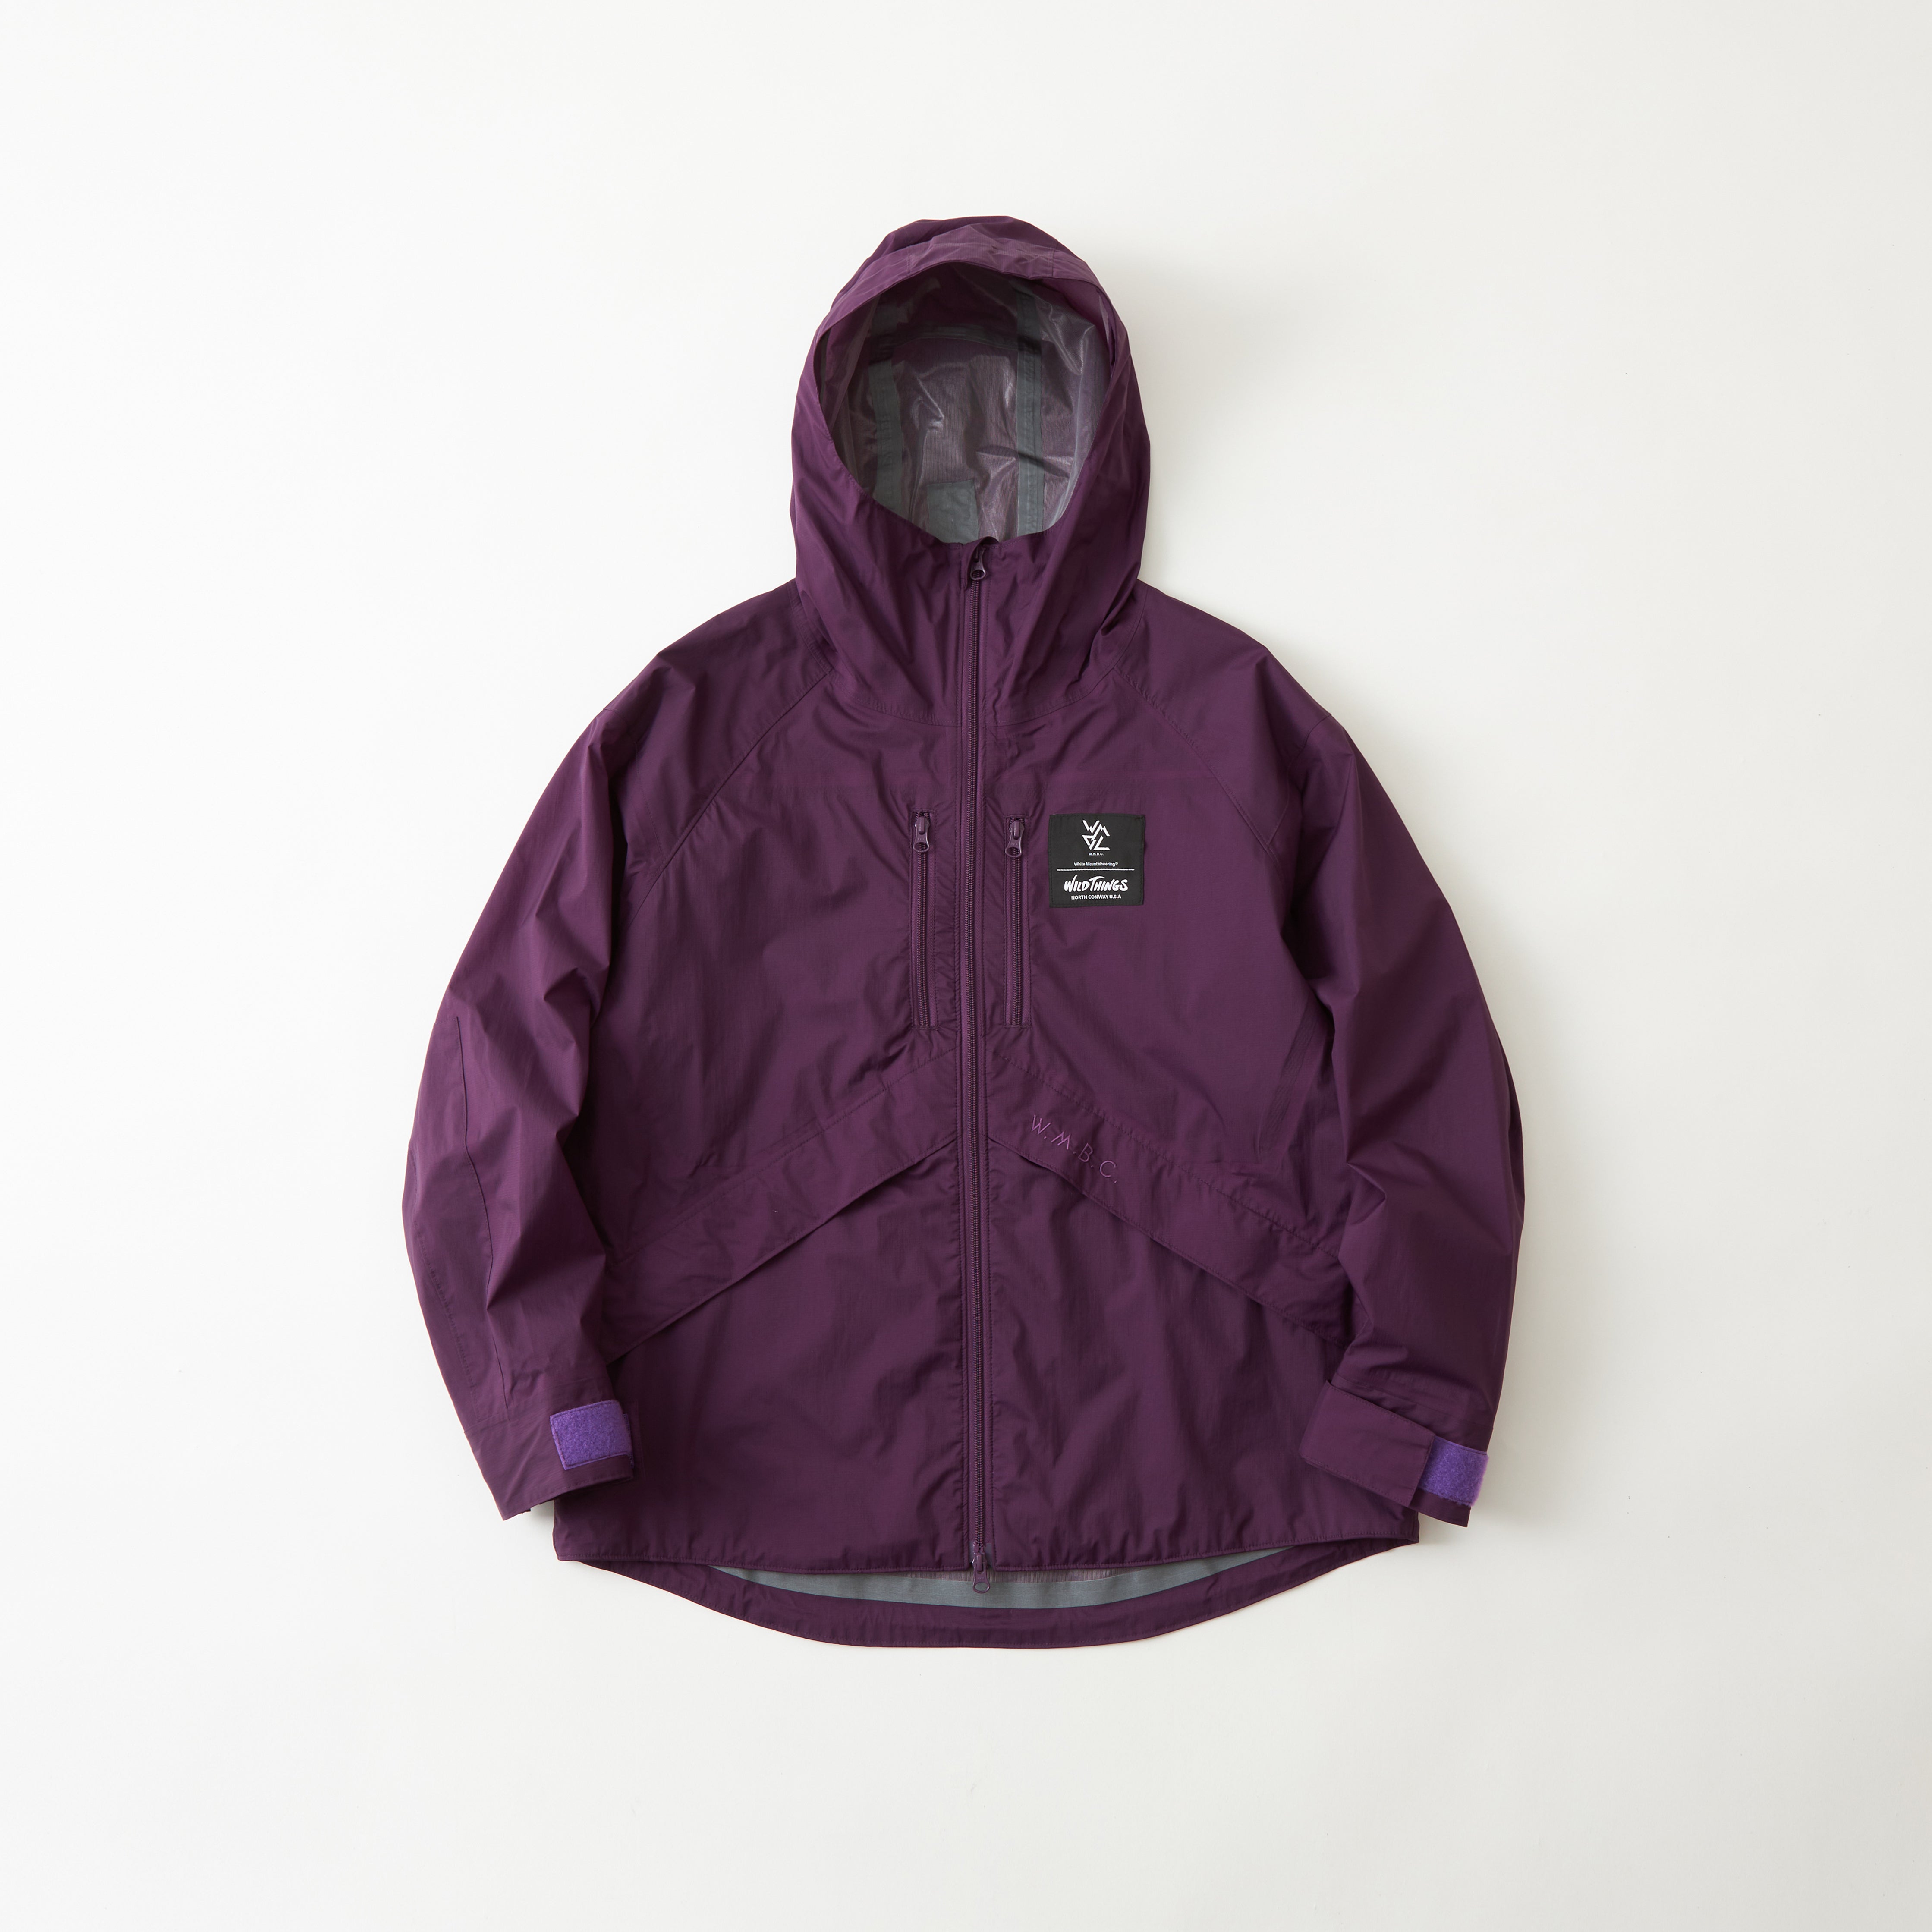 W.M.B.C – White Mountaineering OFFICIAL WEB SITE.